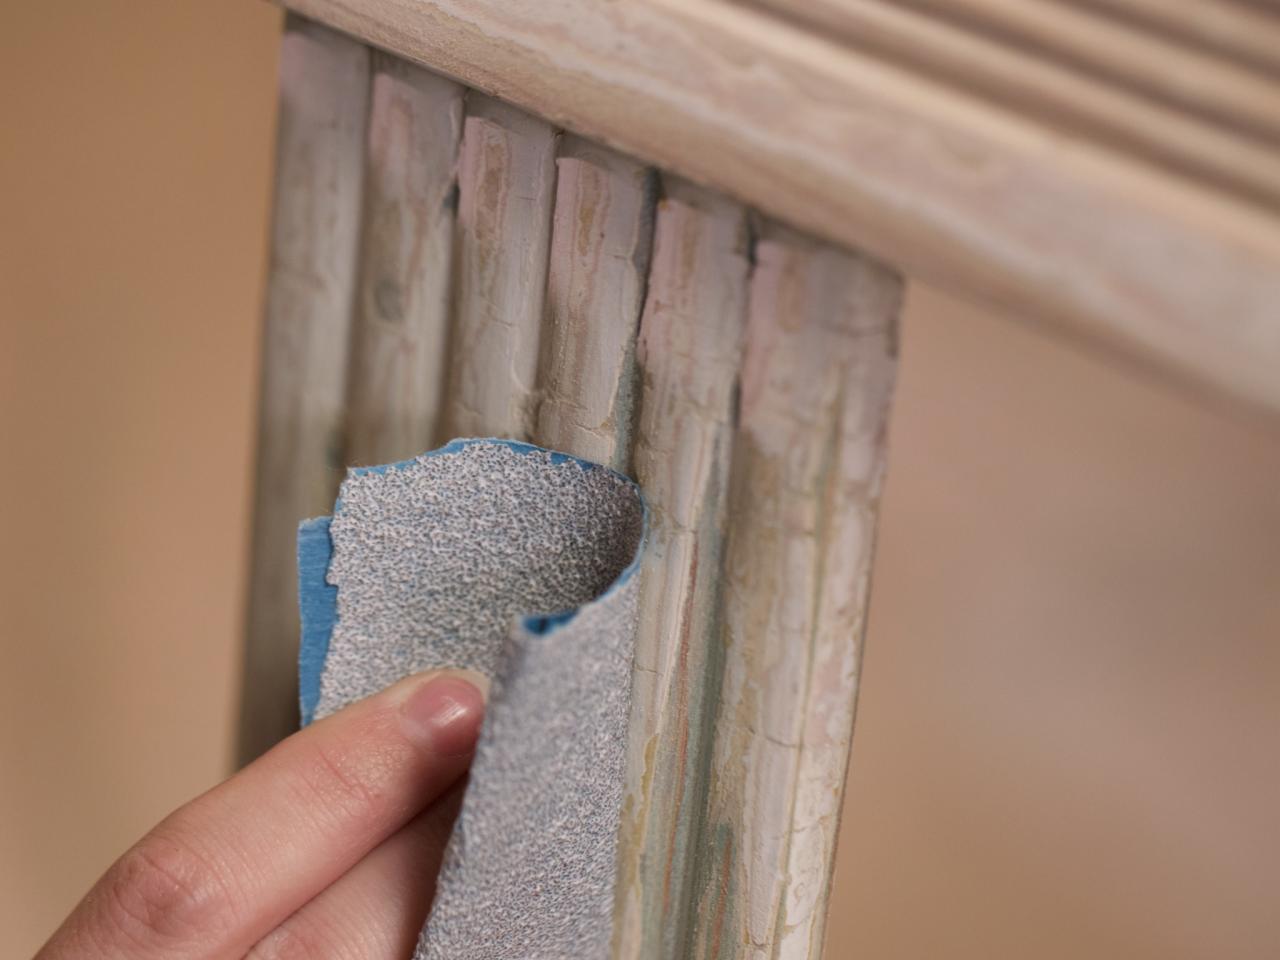 How To Paint Wood Furniture, How To Sand And Paint Wood Furniture